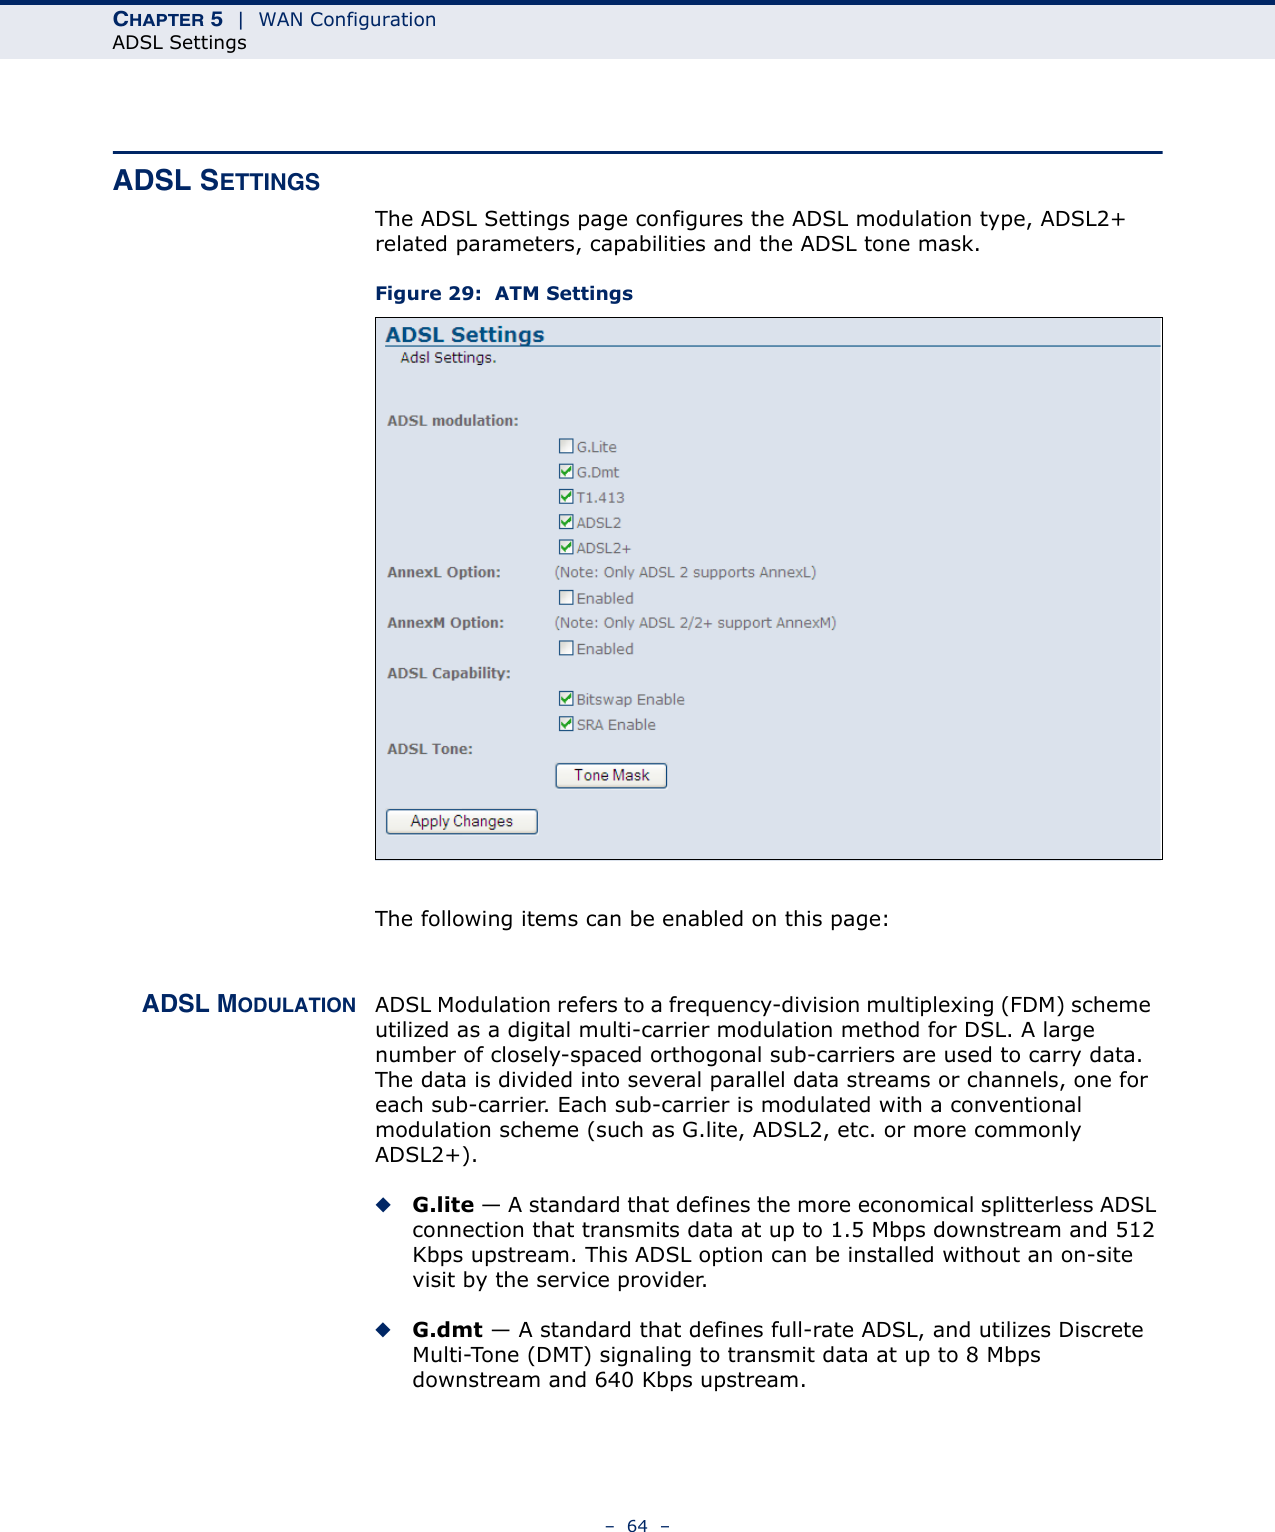 CHAPTER 5  |  WAN ConfigurationADSL Settings–  64  –ADSL SETTINGSThe ADSL Settings page configures the ADSL modulation type, ADSL2+ related parameters, capabilities and the ADSL tone mask.Figure 29:  ATM SettingsThe following items can be enabled on this page:ADSL MODULATION ADSL Modulation refers to a frequency-division multiplexing (FDM) scheme  utilized as a digital multi-carrier modulation method for DSL. A large number of closely-spaced orthogonal sub-carriers are used to carry data. The data is divided into several parallel data streams or channels, one for each sub-carrier. Each sub-carrier is modulated with a conventional modulation scheme (such as G.lite, ADSL2, etc. or more commonly ADSL2+).◆G.lite — A standard that defines the more economical splitterless ADSL connection that transmits data at up to 1.5 Mbps downstream and 512 Kbps upstream. This ADSL option can be installed without an on-site visit by the service provider.◆G.dmt — A standard that defines full-rate ADSL, and utilizes Discrete Multi-Tone (DMT) signaling to transmit data at up to 8 Mbps downstream and 640 Kbps upstream.